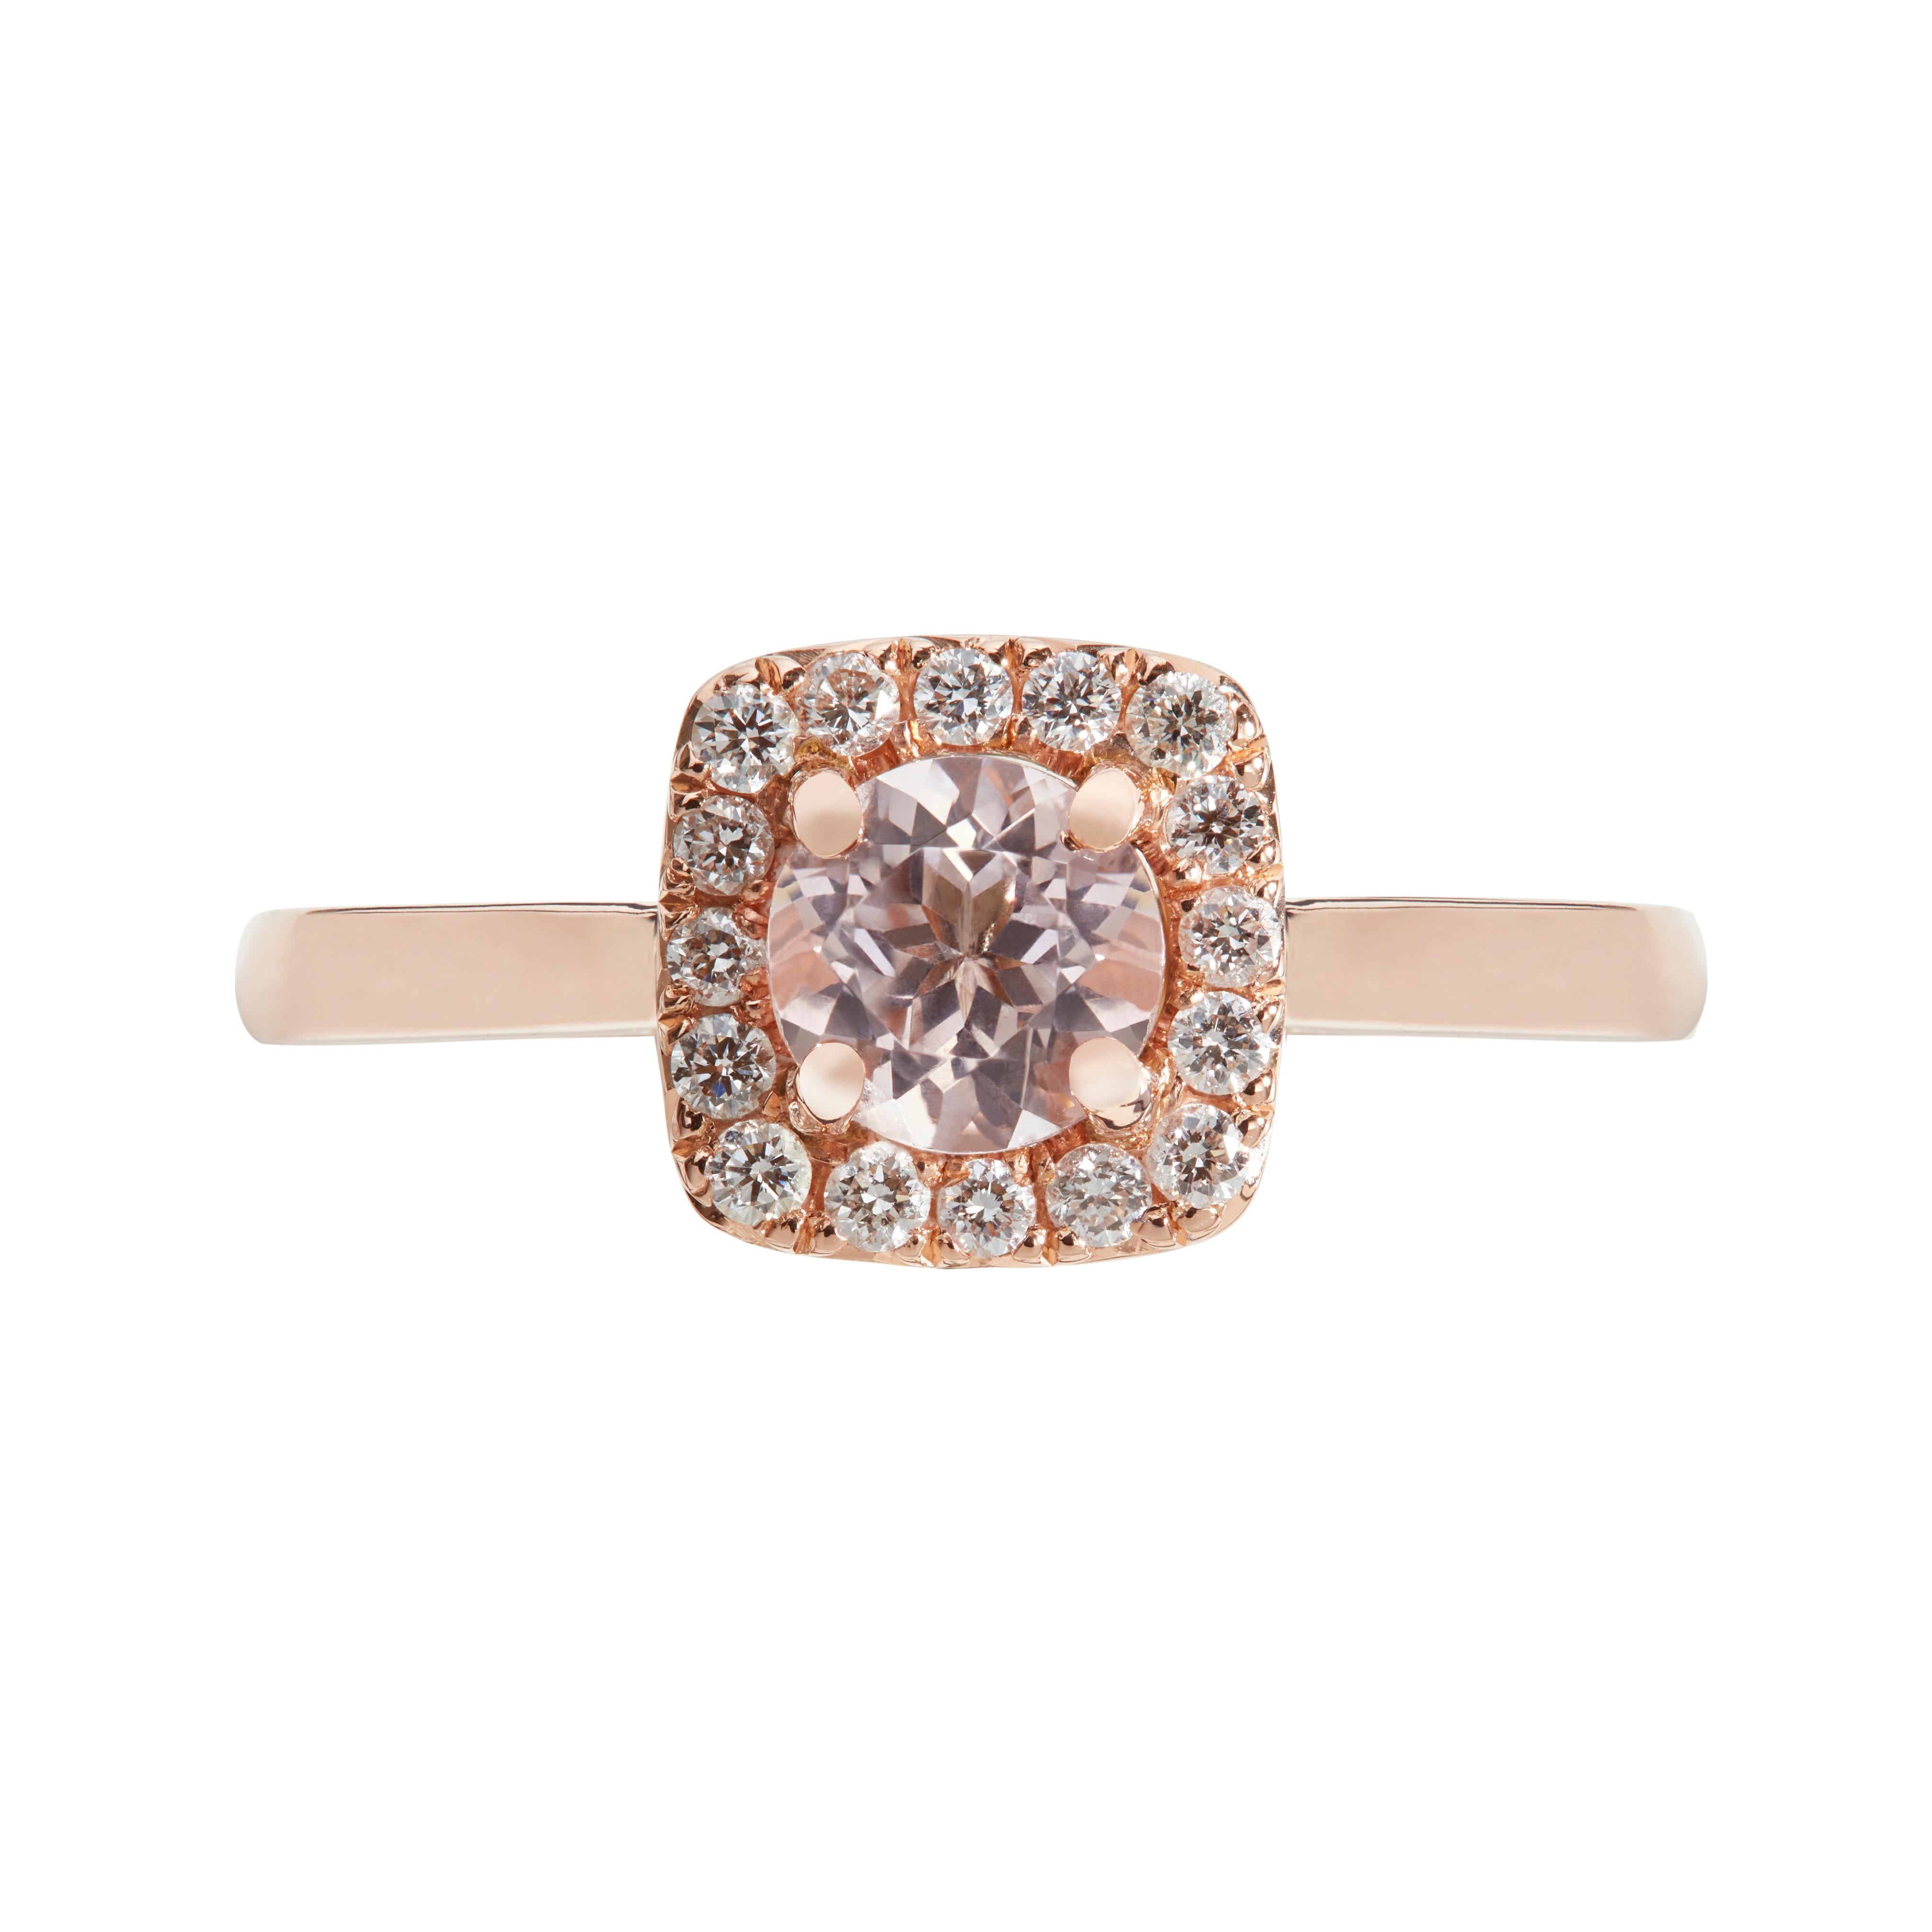 This gorgeous morganite ring is a pink dream for an engagement ring. We think of the aurora borealis and the pink hues that come over the horizon when looking into the morganite. Set in 18k rose gold it enhances the pink hue while supporting 16